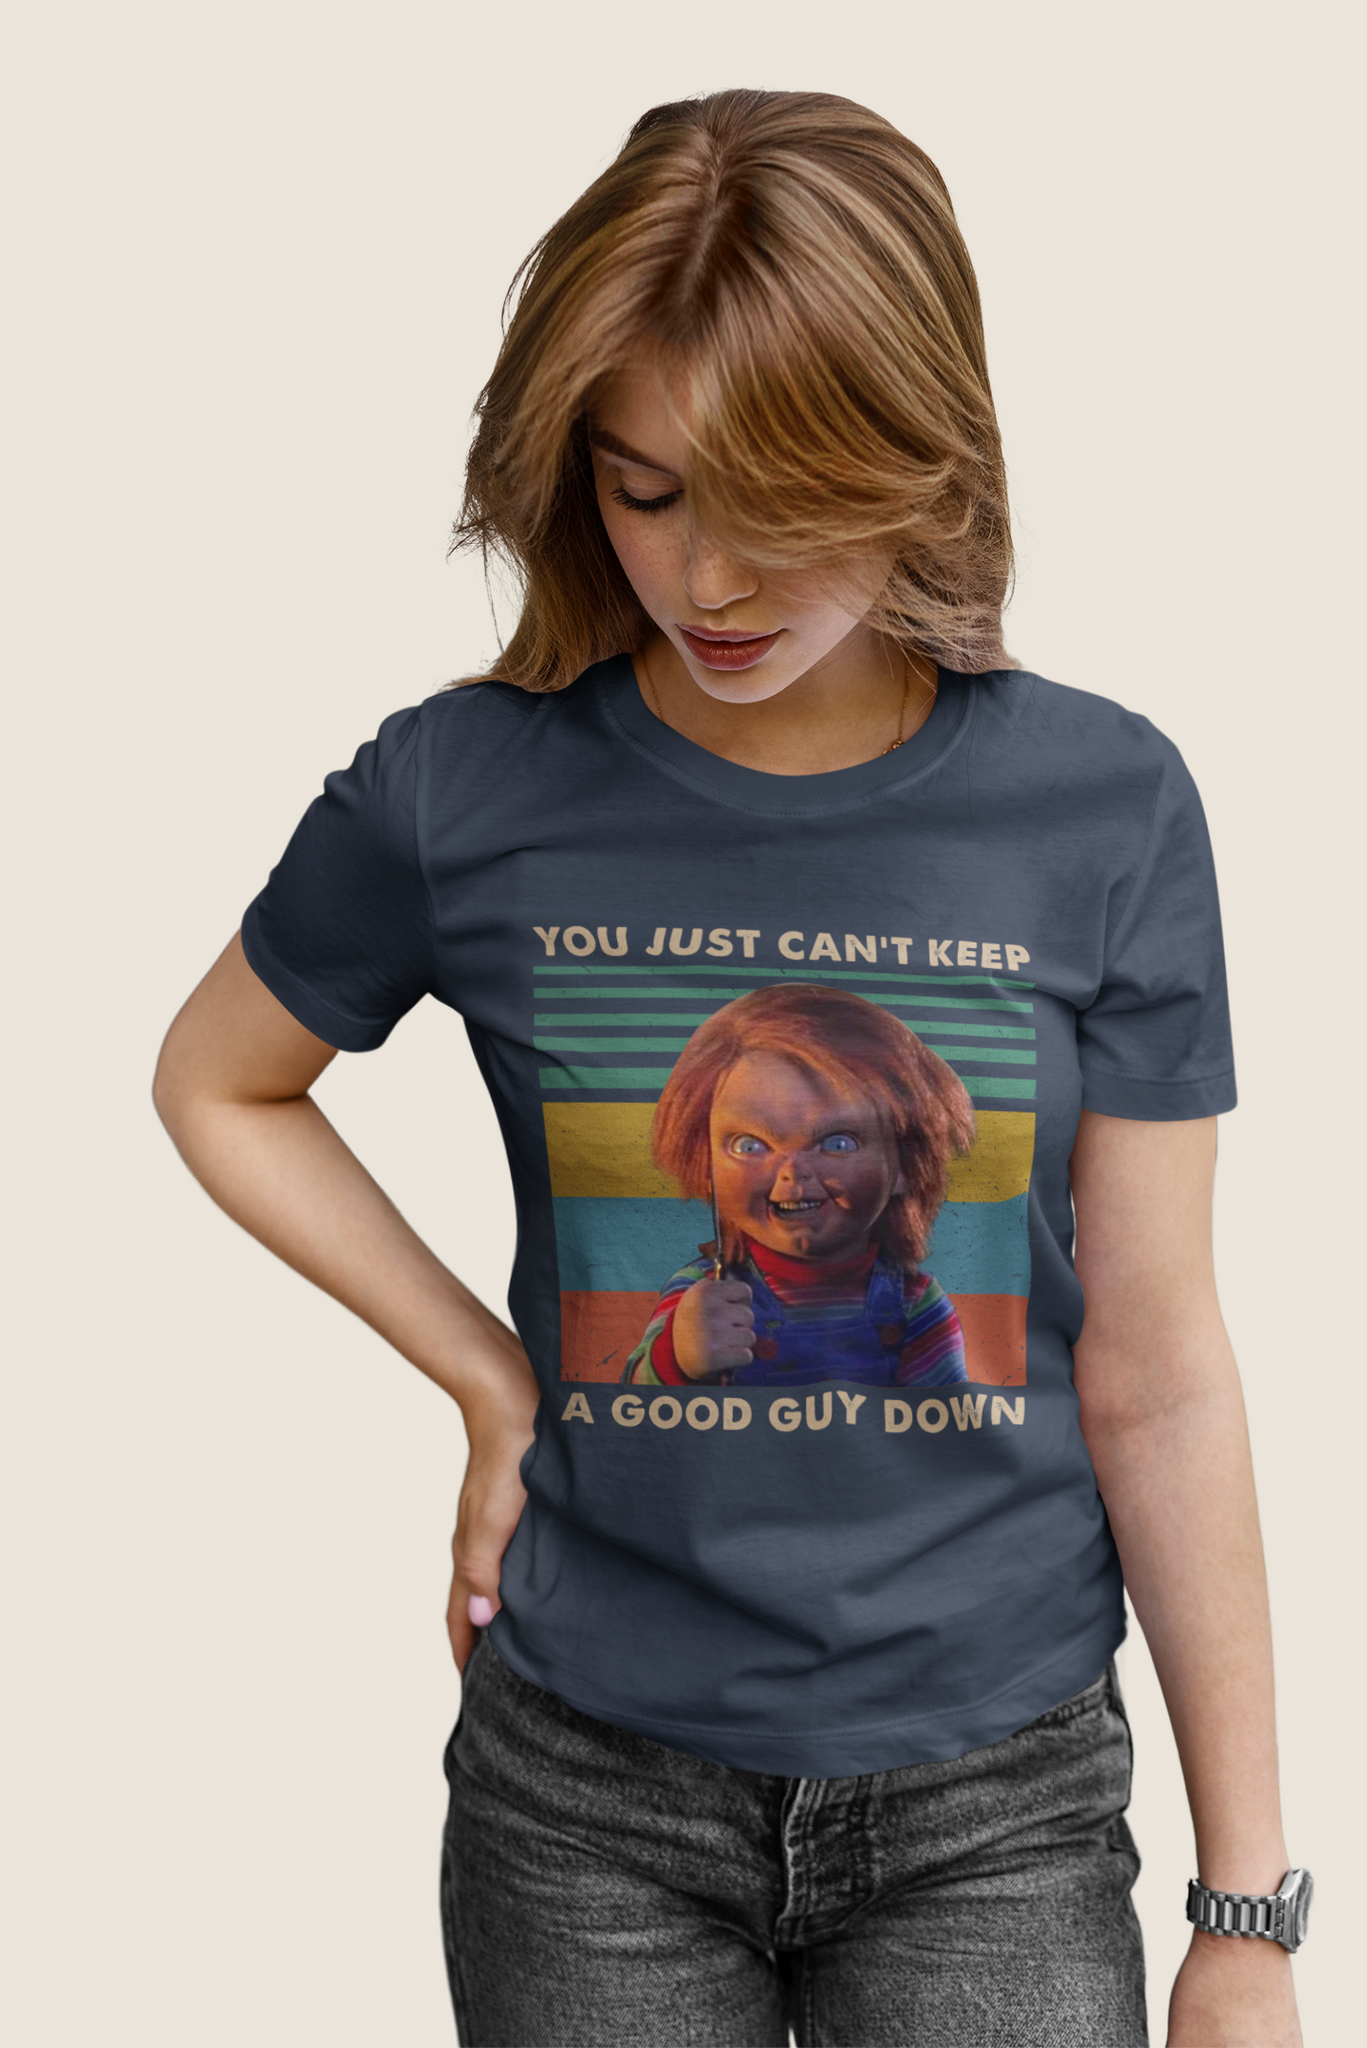 Chucky Vintage T Shirt, You Just Cant Keep A Good Guy Down Tshirt, Horror Character Shirt, Halloween Gifts